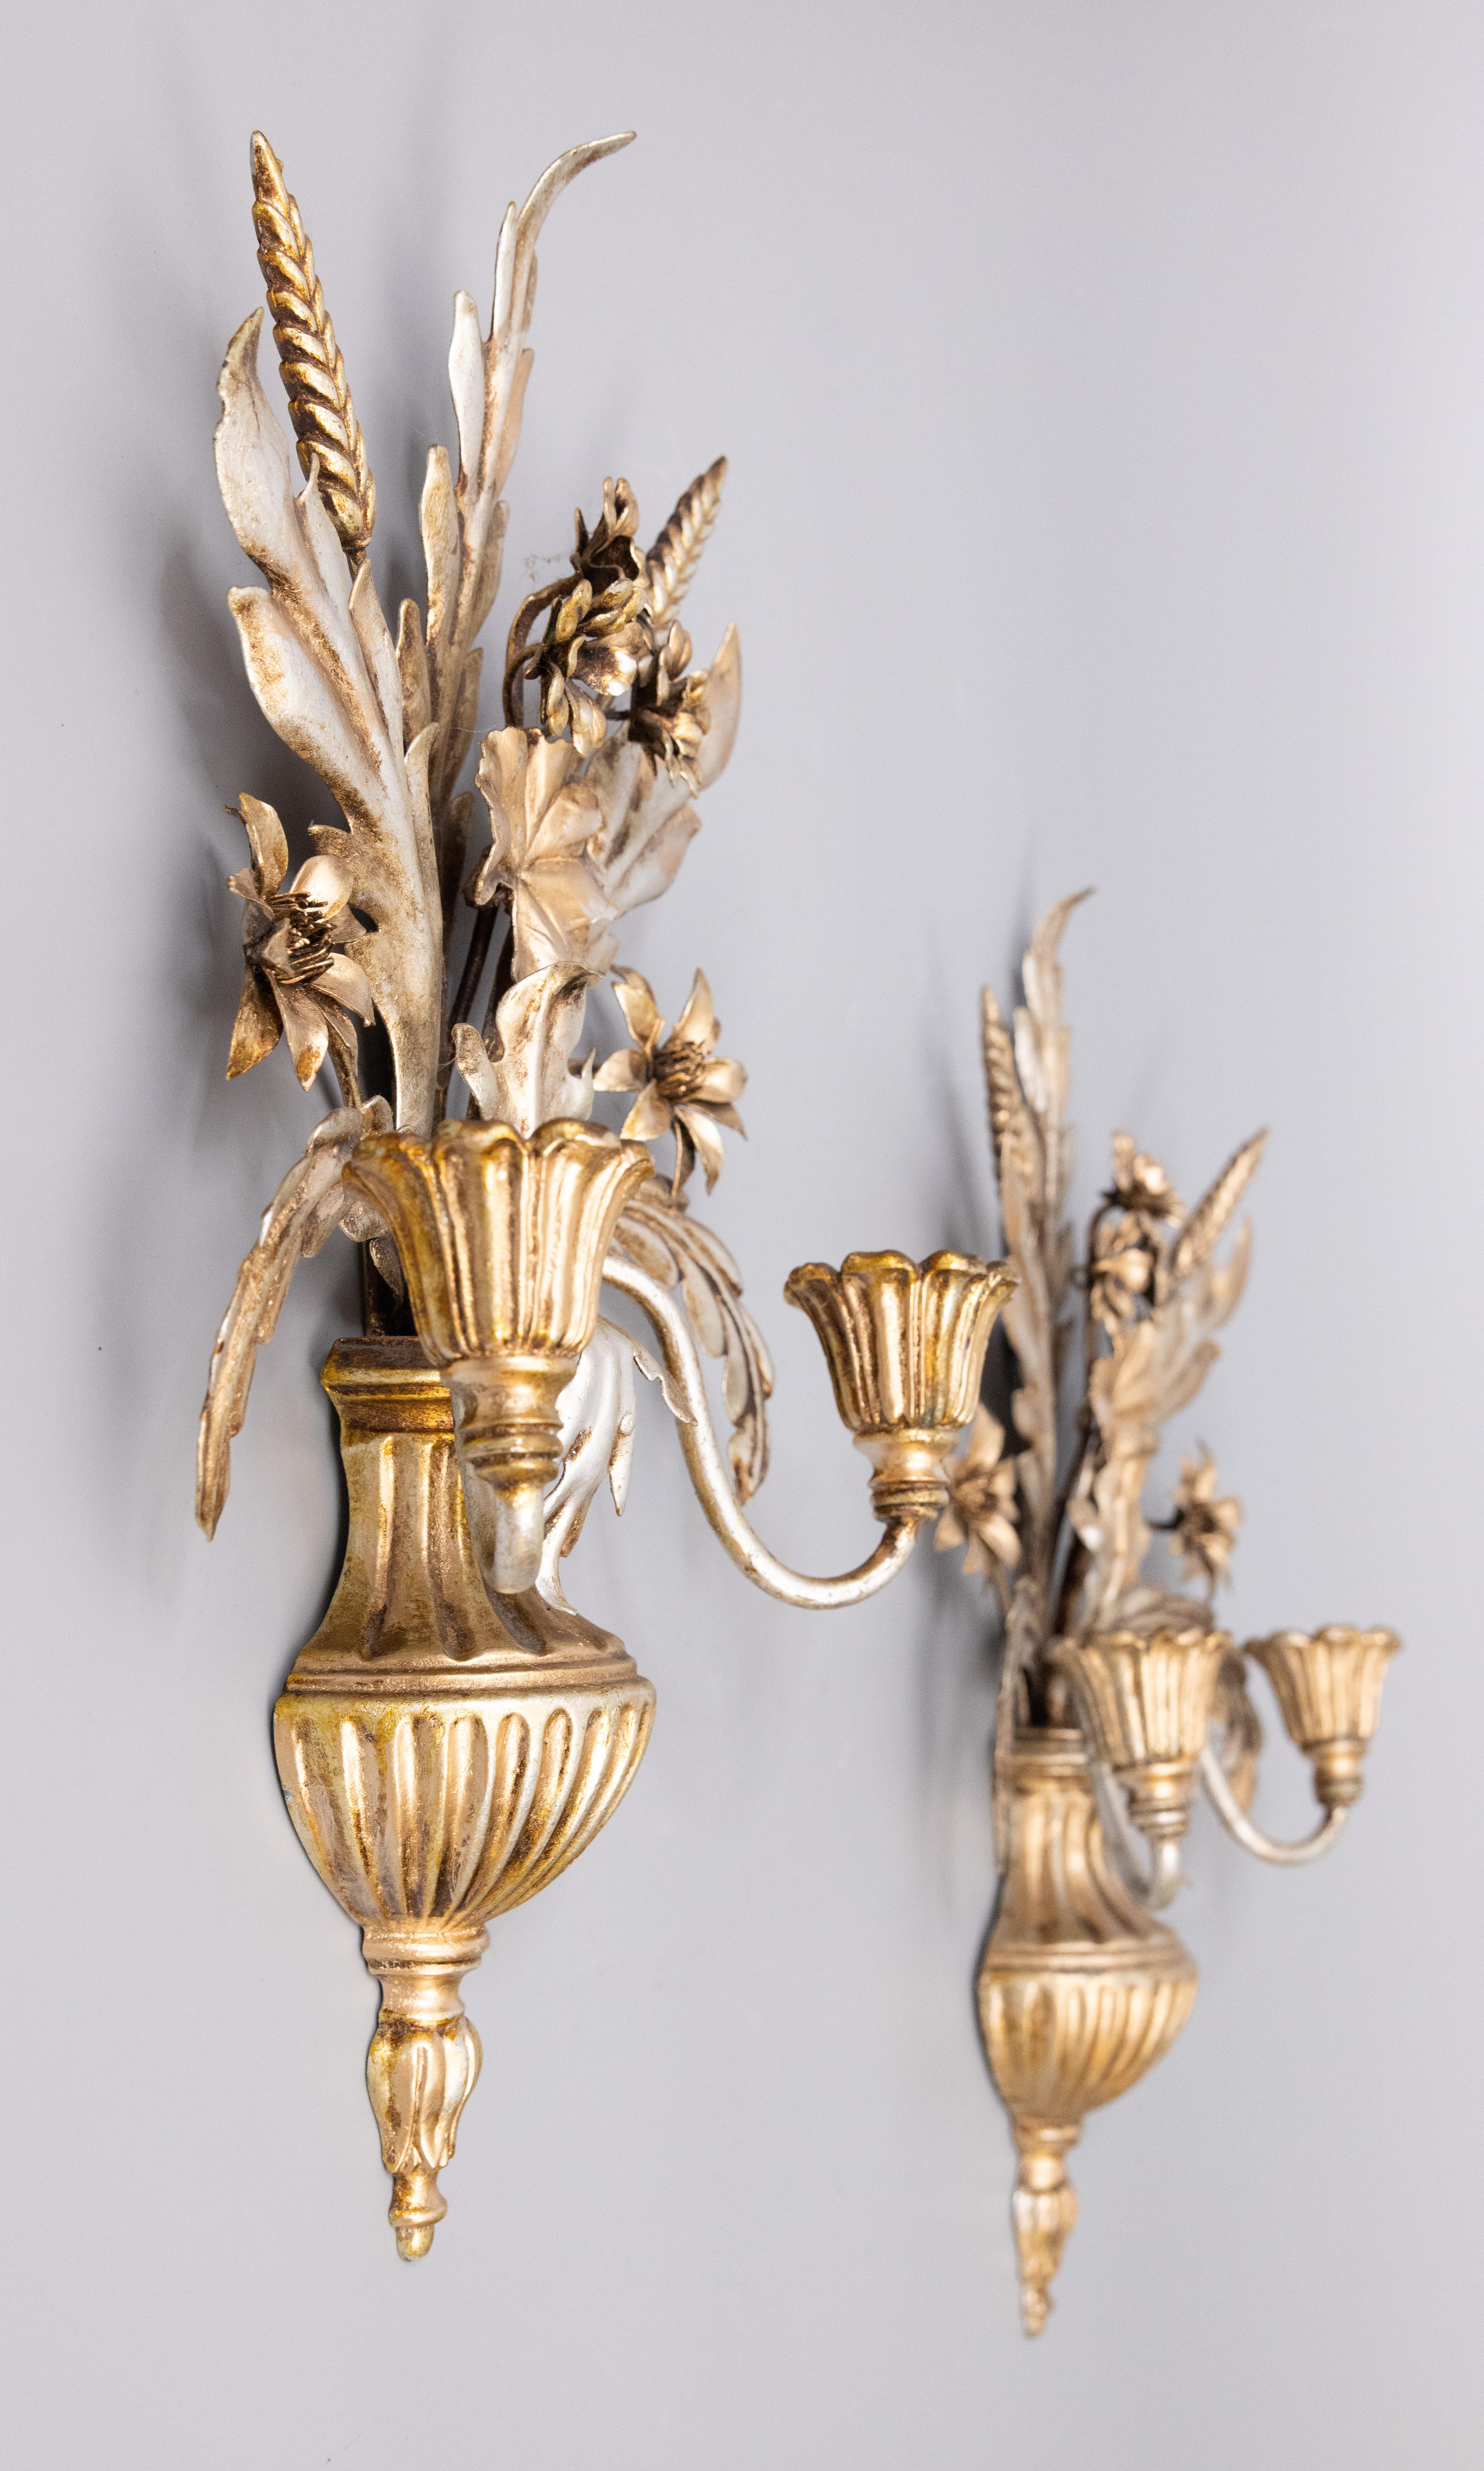 20th Century Pair of Mid-Century Italian Silver Gilt Tole Floral Wheat Candle Sconces